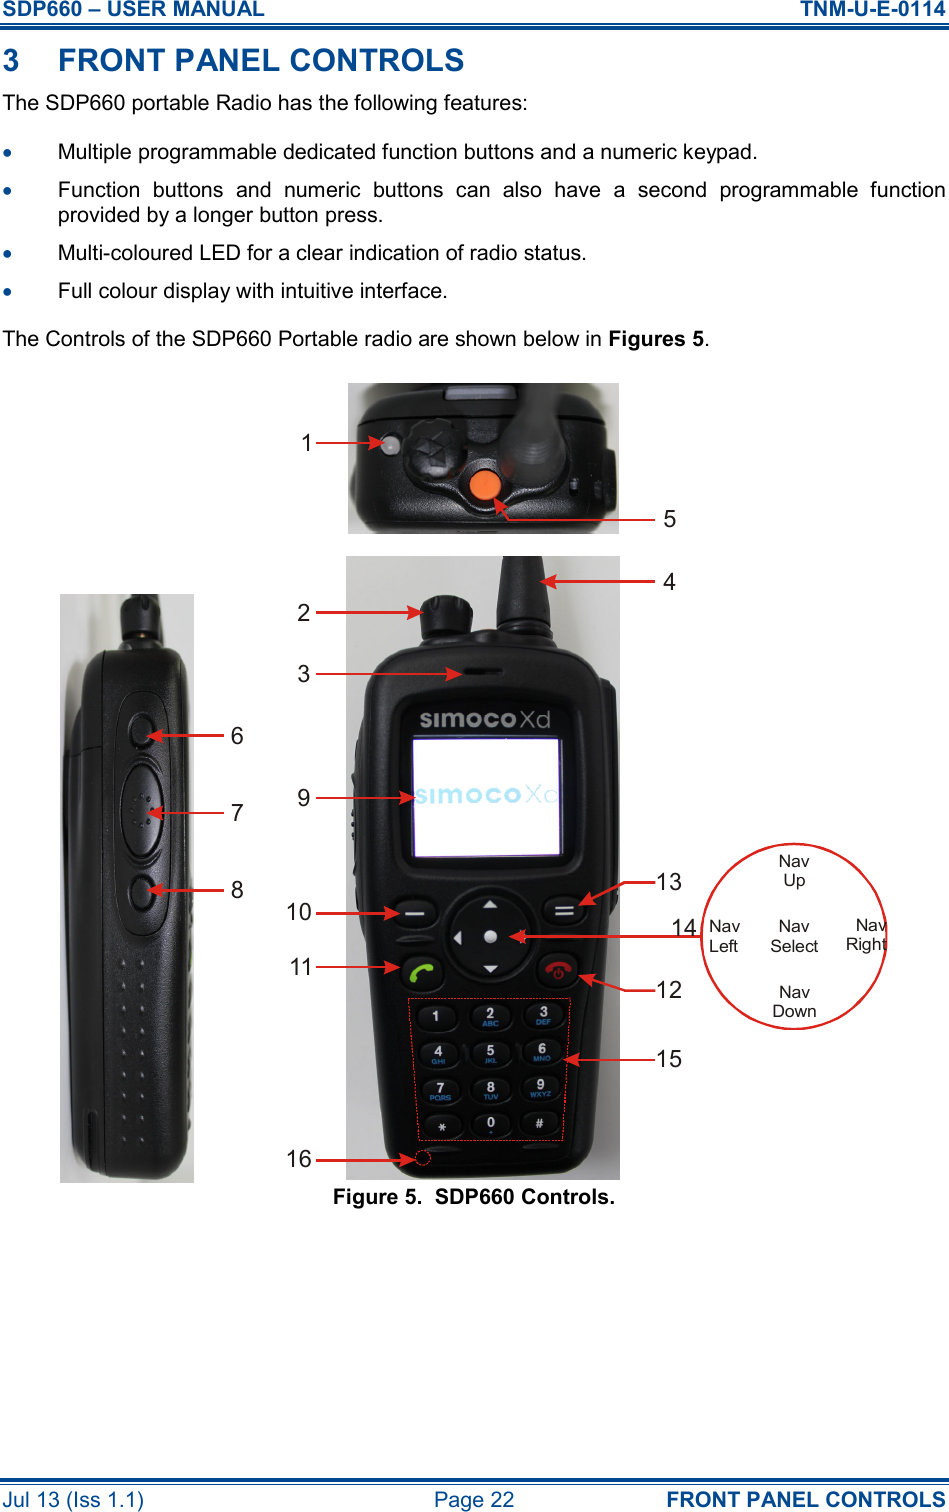 SDP660 – USER MANUAL  TNM-U-E-0114 Jul 13 (Iss 1.1)  Page 22  FRONT PANEL CONTROLS 3  FRONT PANEL CONTROLS The SDP660 portable Radio has the following features: •  Multiple programmable dedicated function buttons and a numeric keypad. •  Function  buttons  and  numeric  buttons  can  also  have  a  second  programmable  function provided by a longer button press. •  Multi-coloured LED for a clear indication of radio status. •  Full colour display with intuitive interface. The Controls of the SDP660 Portable radio are shown below in Figures 5. Figure 5.  SDP660 Controls.  NavSelectNavLeftNavRightNavUpNavDown1234567891011 1213141516